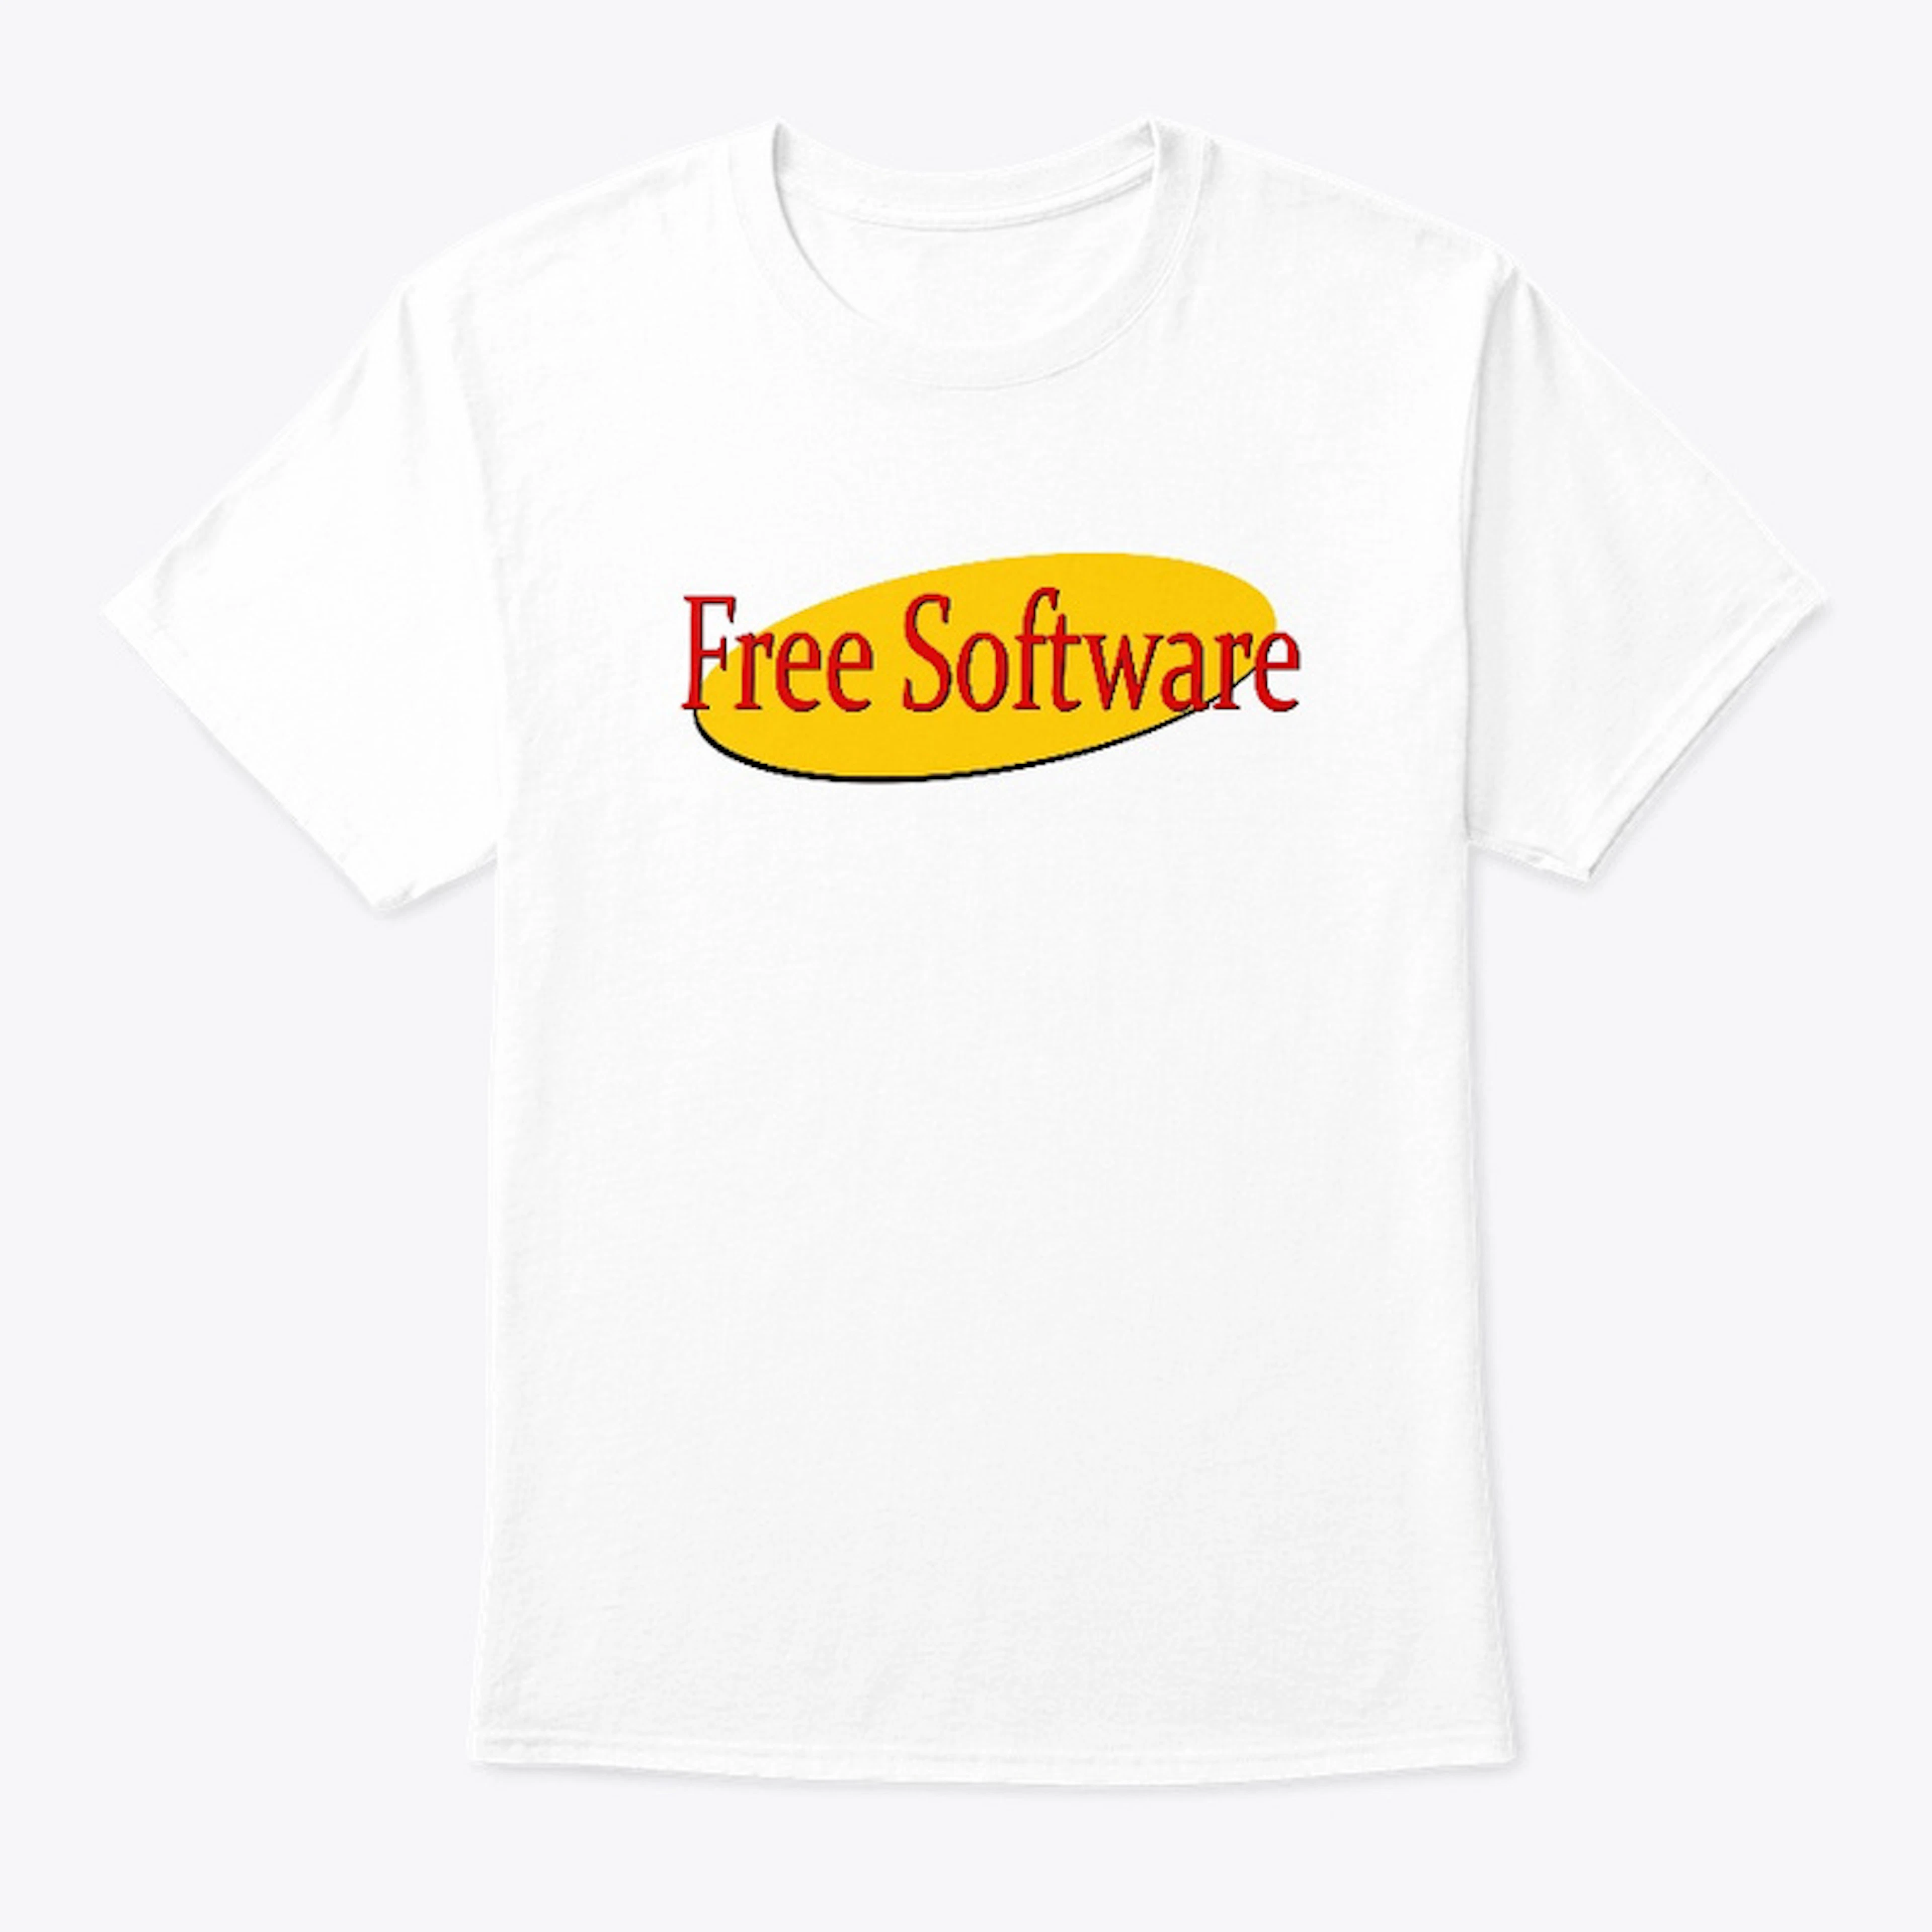 Free Software in a Yellow Circle